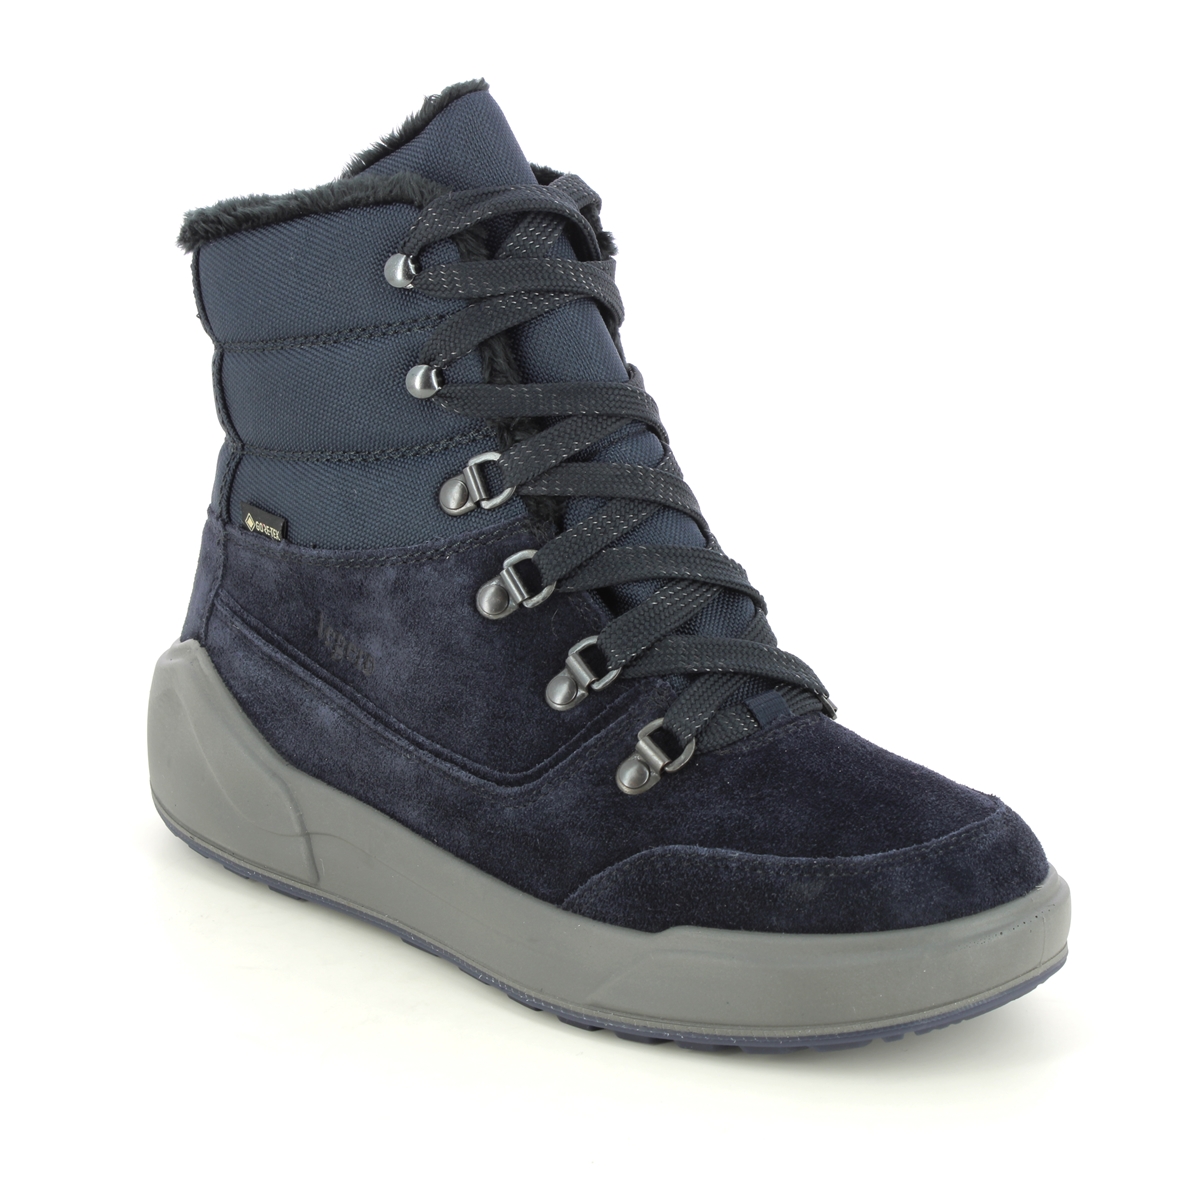 Legero Cosy Lace Gtx Navy Suede Womens Winter Boots 2000286-8000 In Size 4.5 In Plain Navy Suede